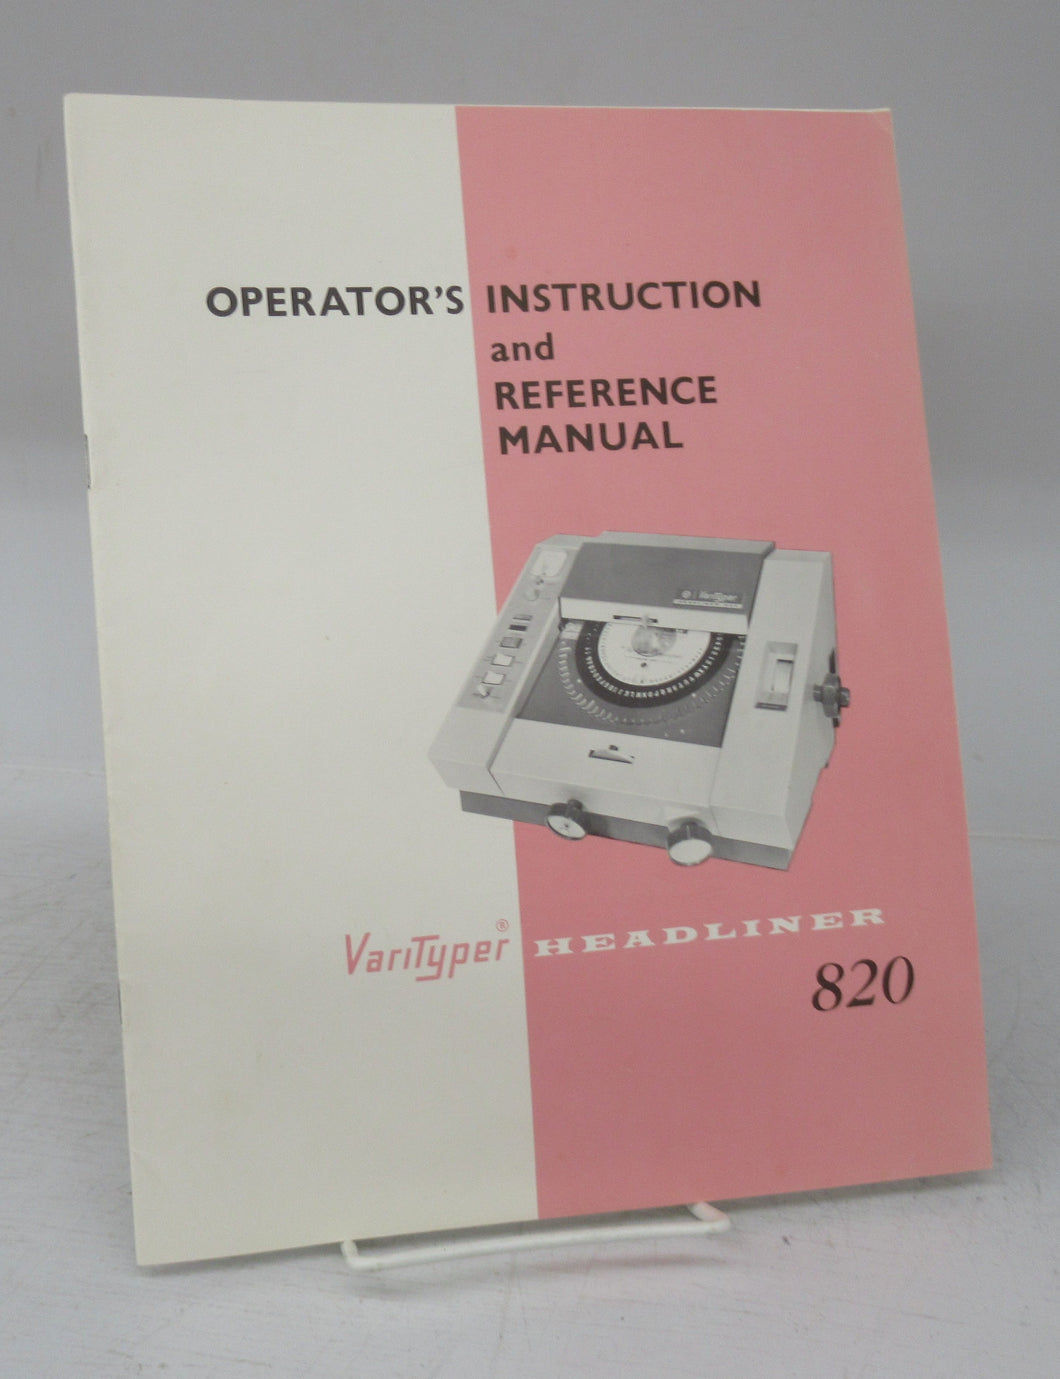 Operator's Instruction and Reference Manual